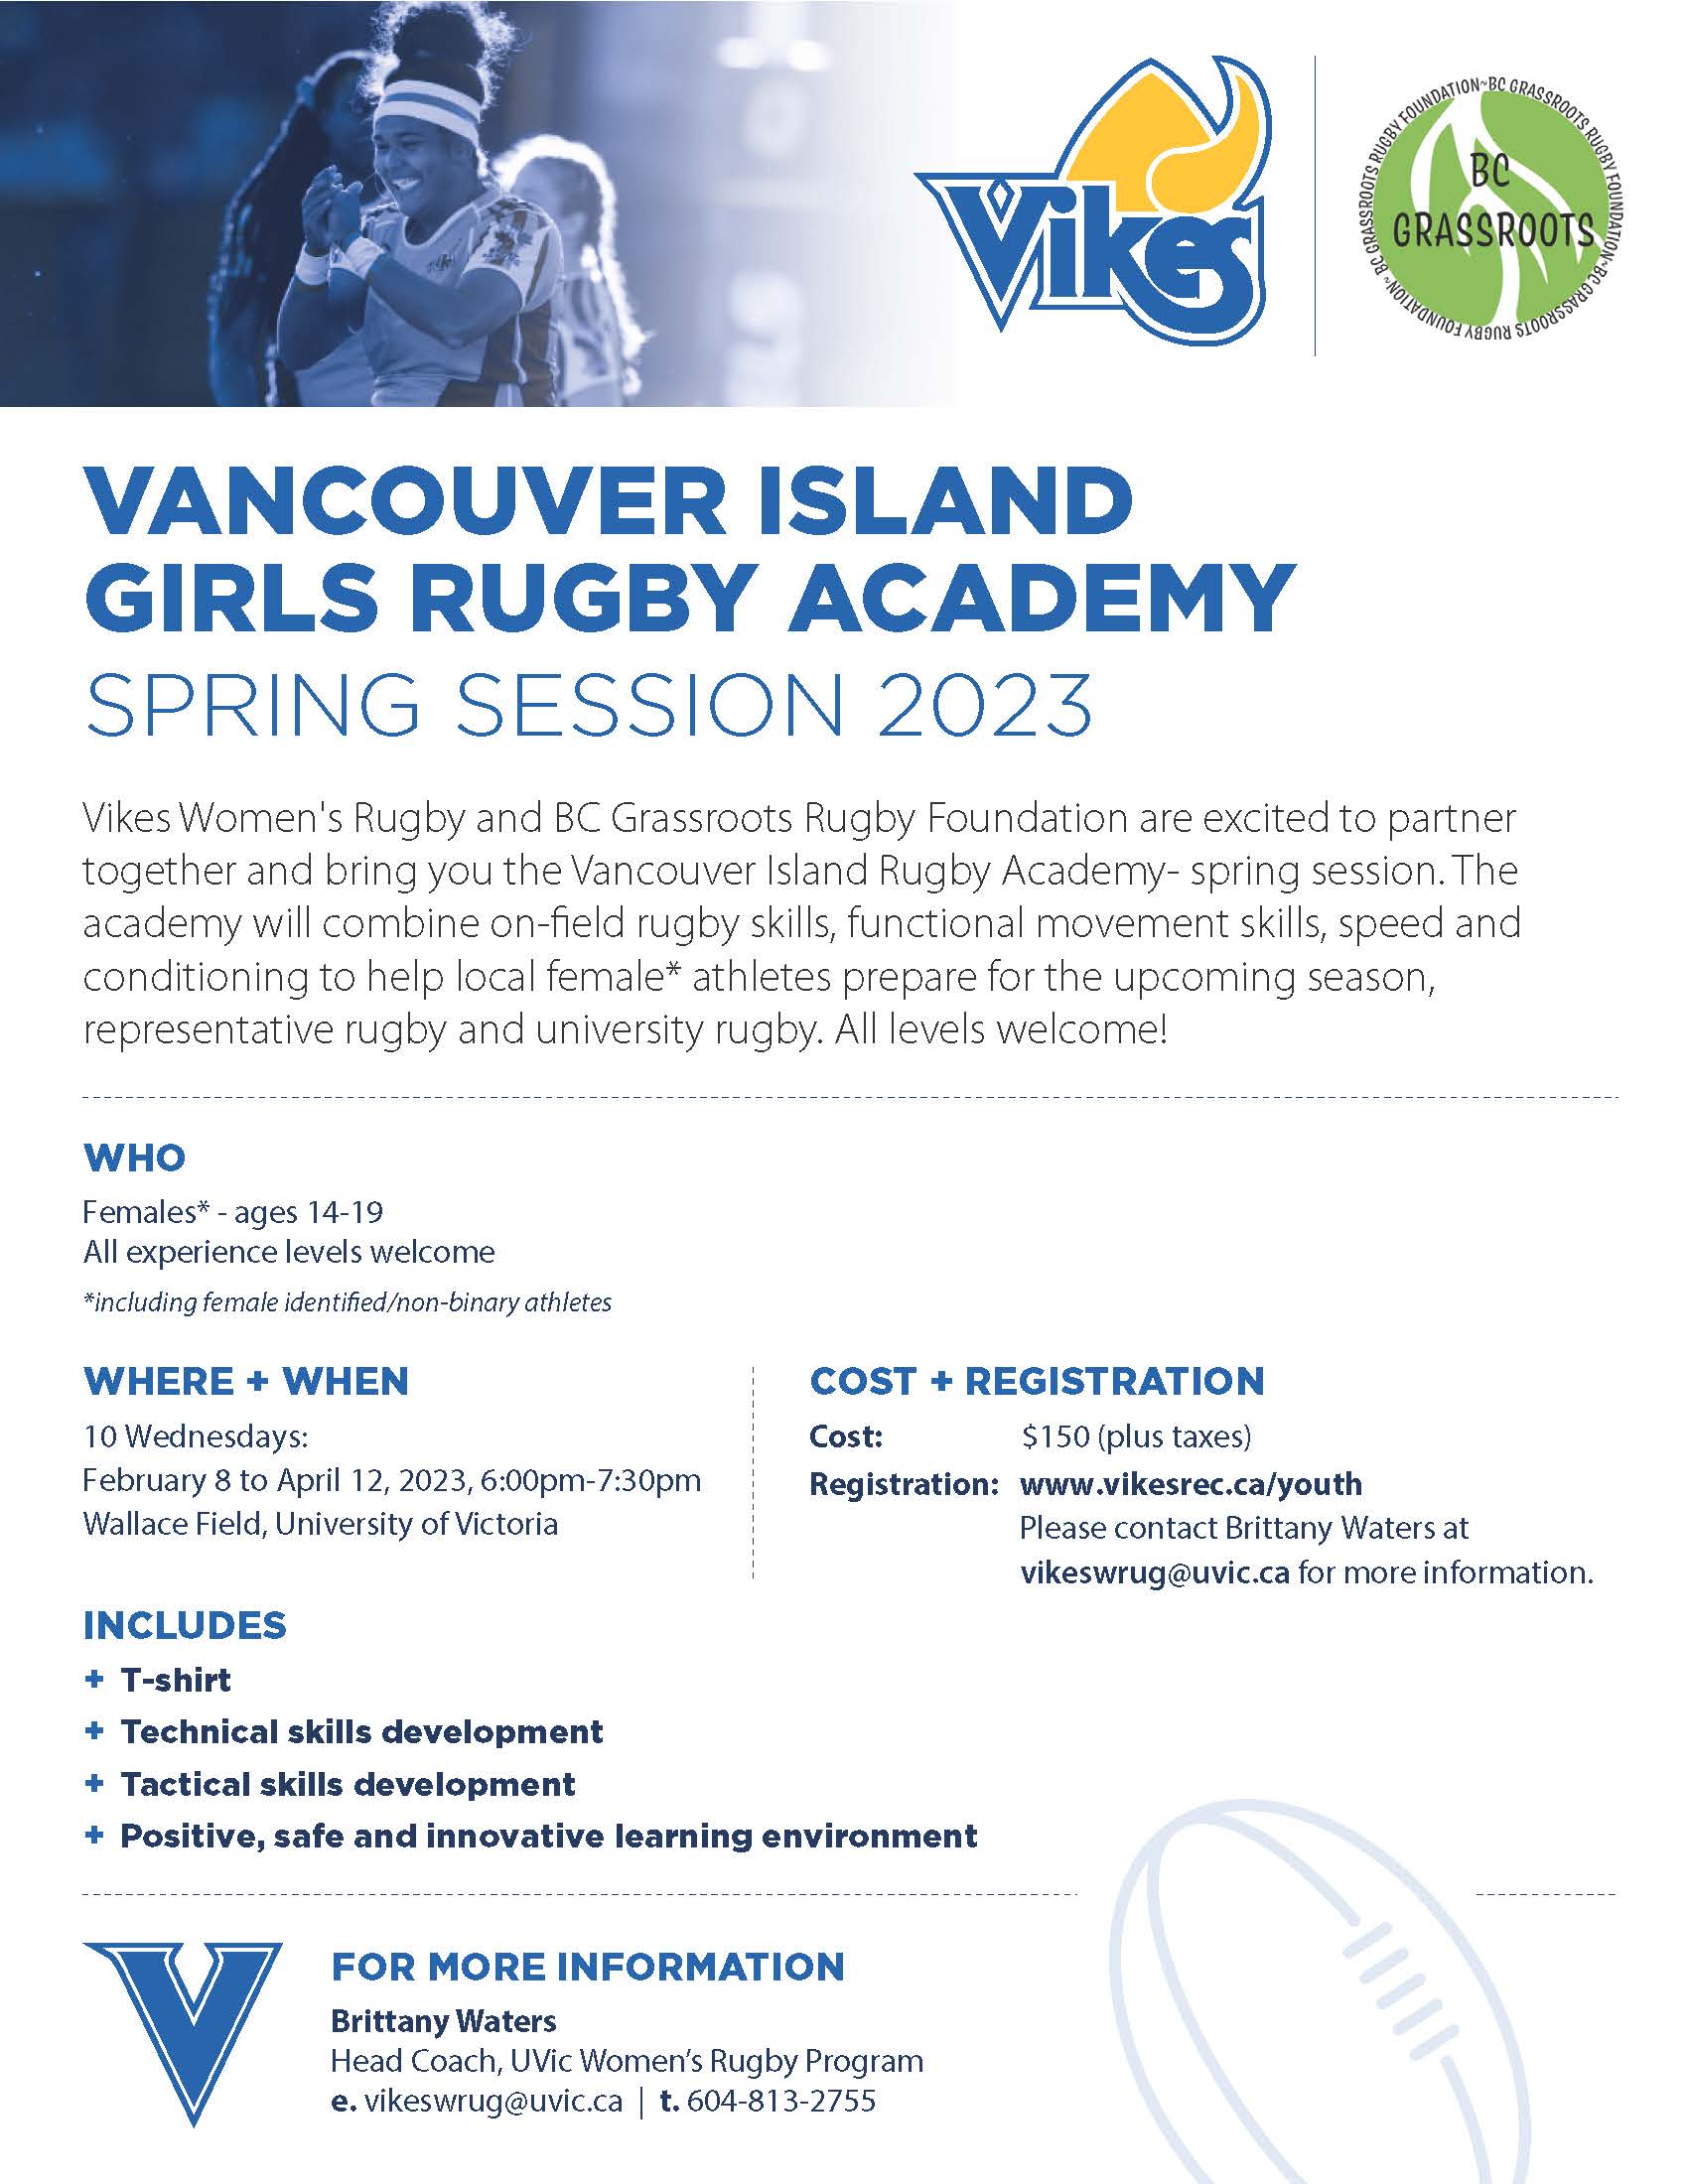 UVIC Vikes Girls Rugby Academy